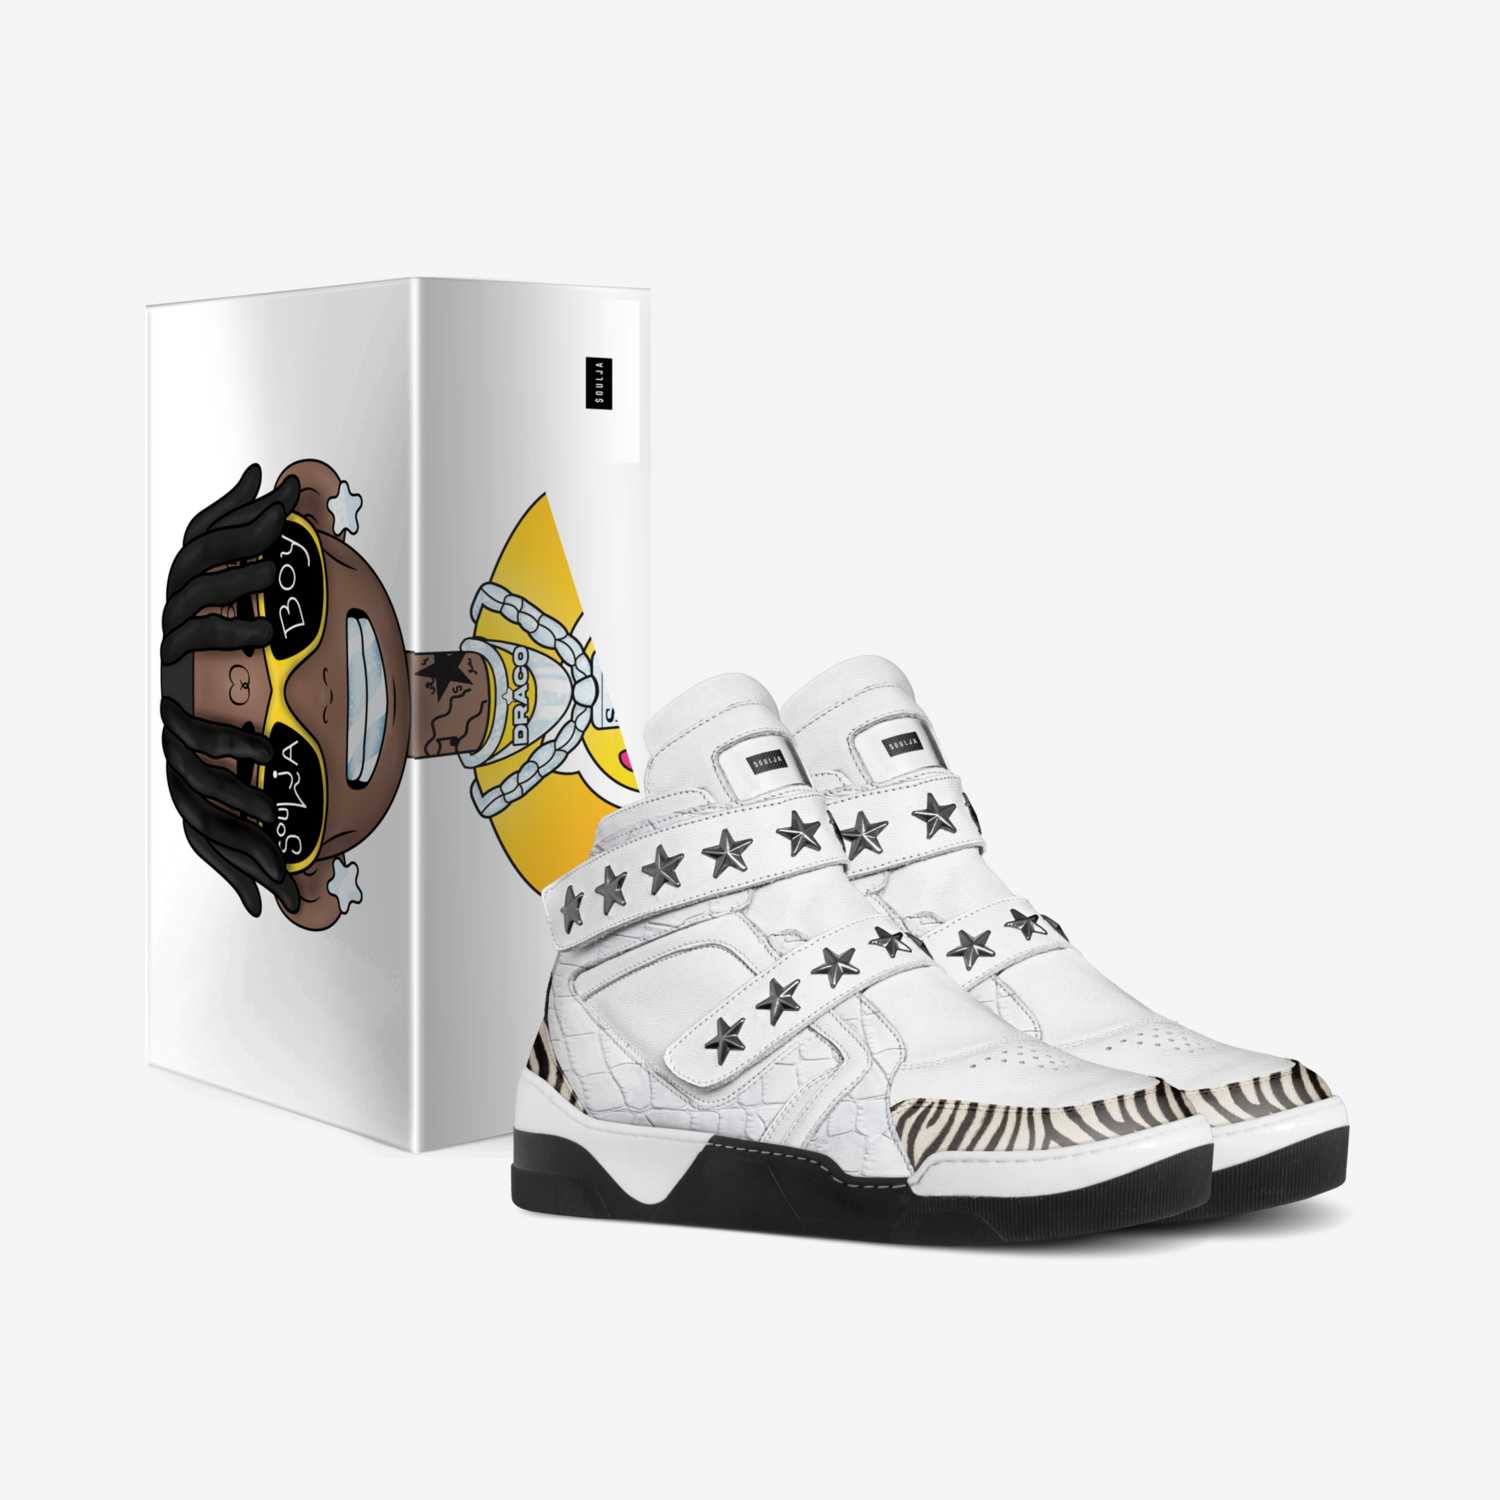 Soulja Stars  custom made in Italy shoes by Deandre Way | Box view